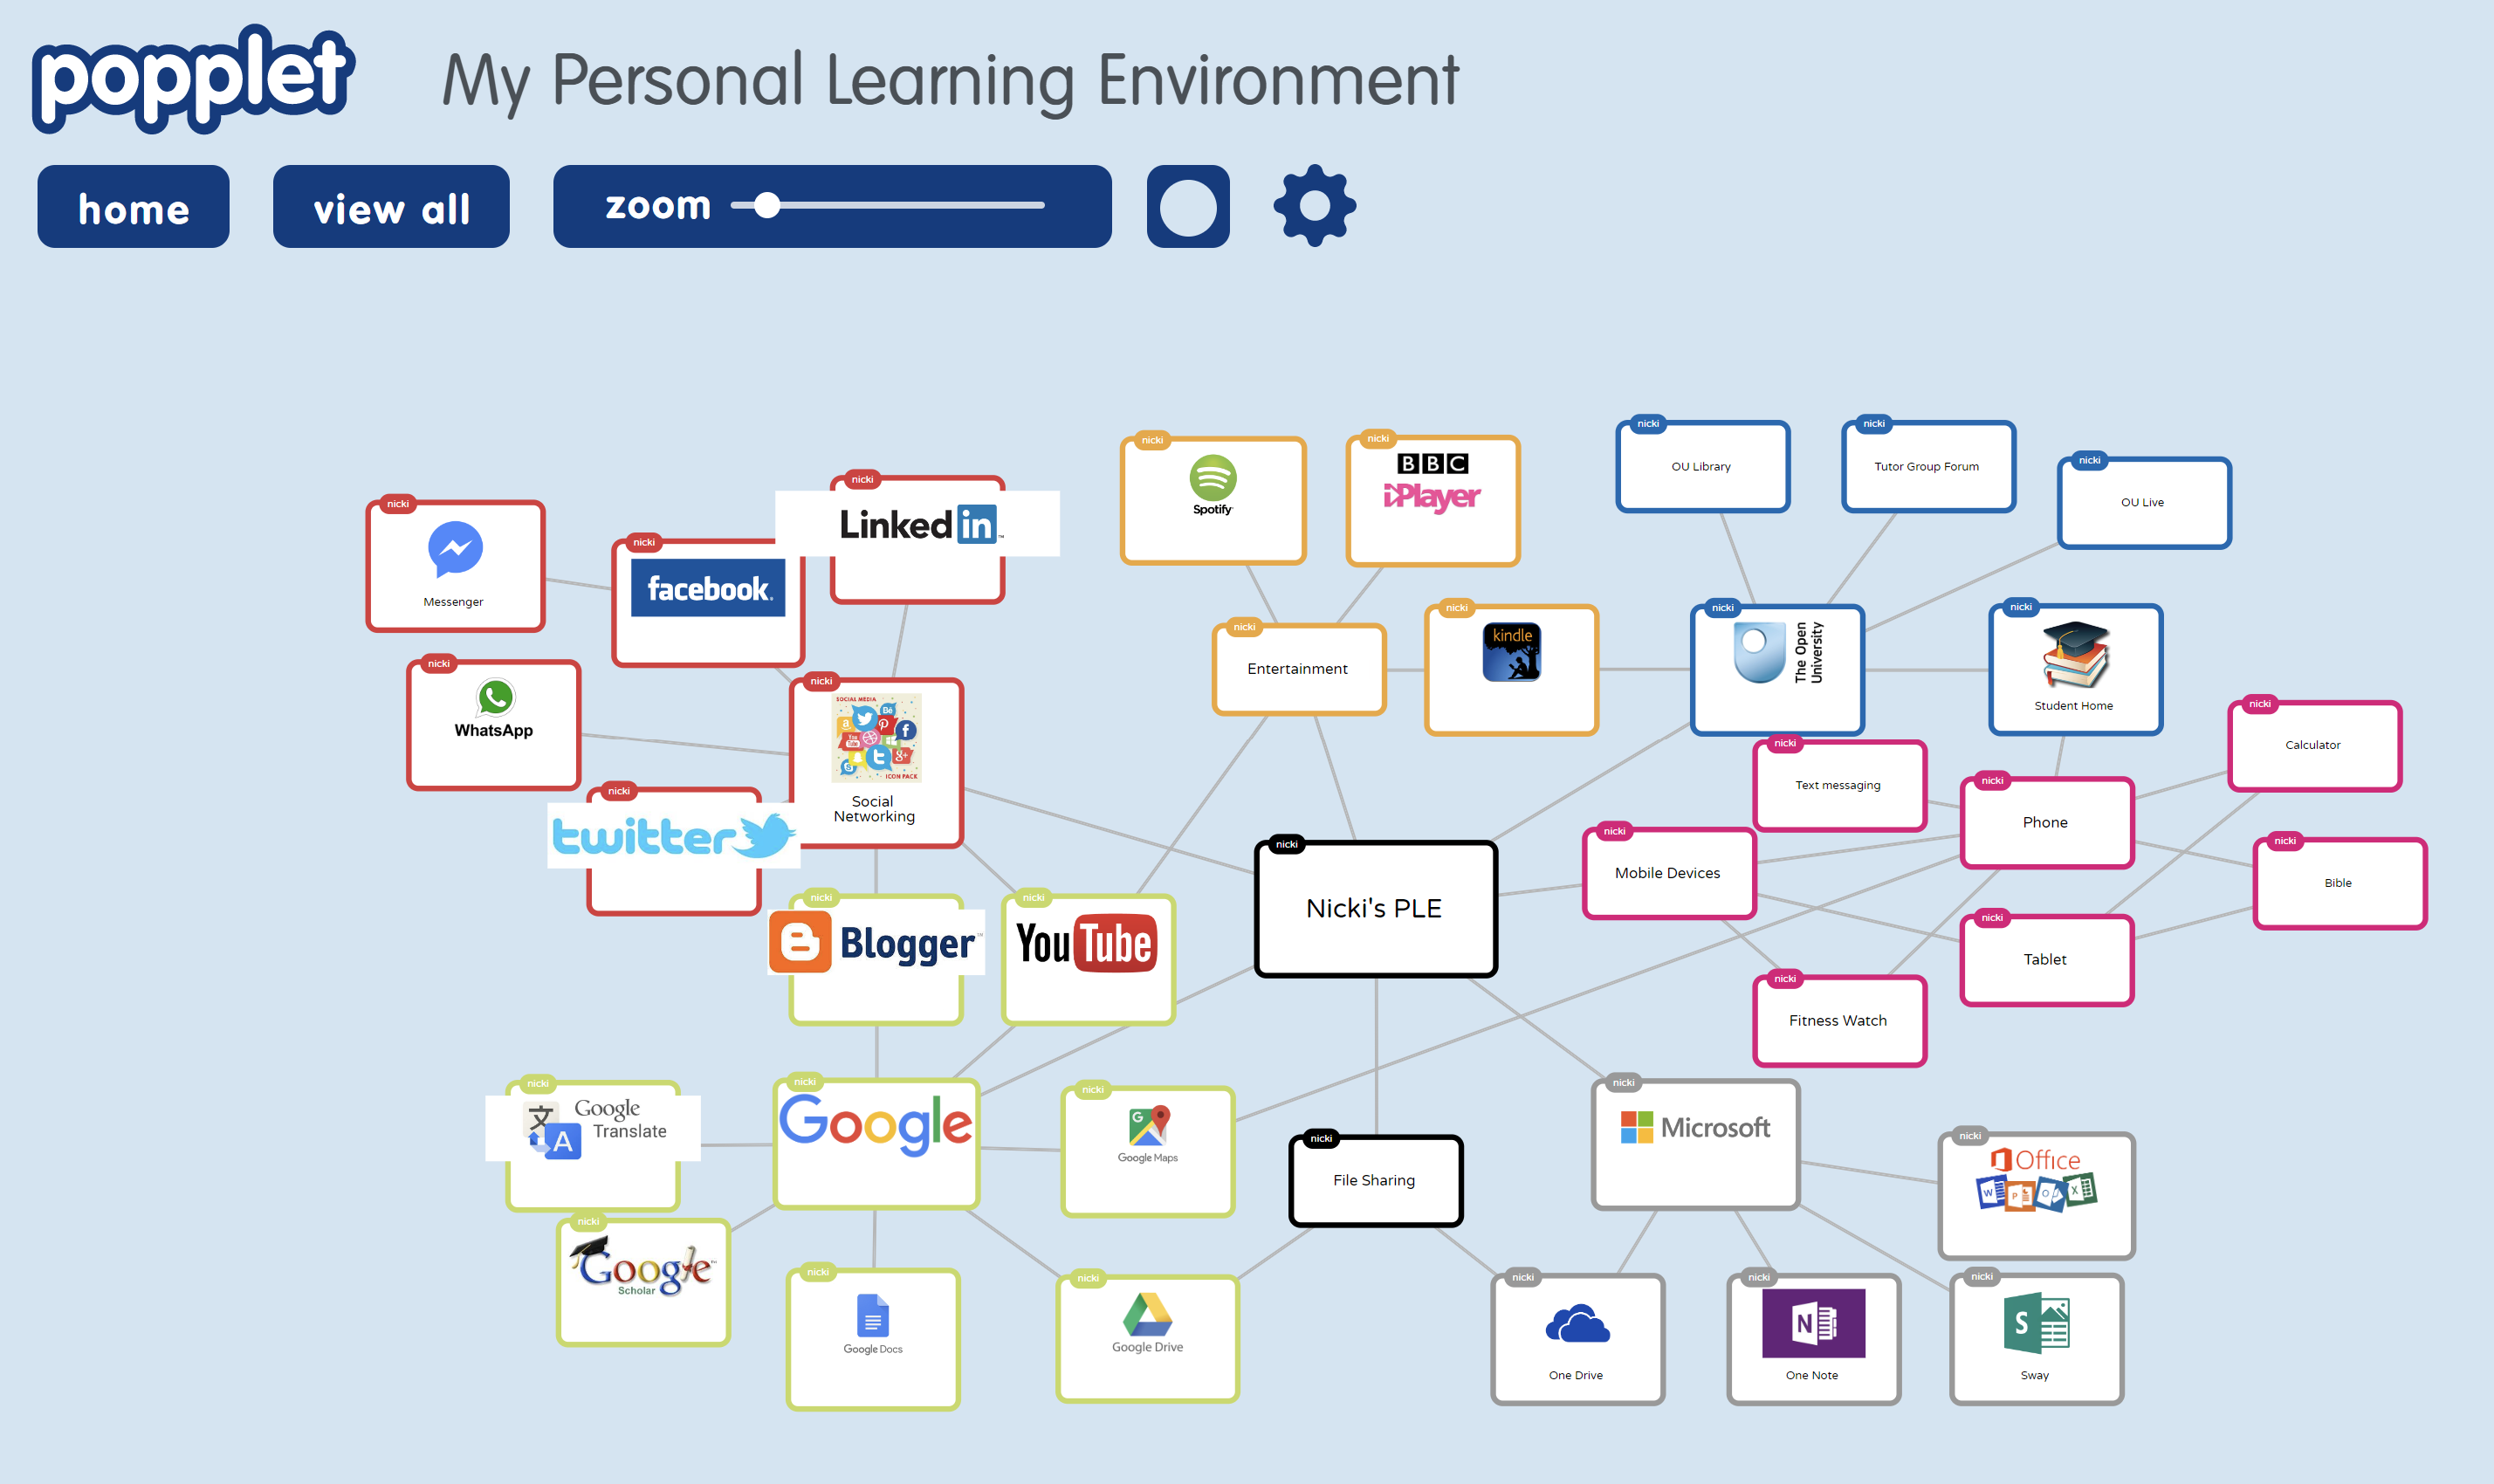 Screenshot of Popplet of my Personal Learning Environment